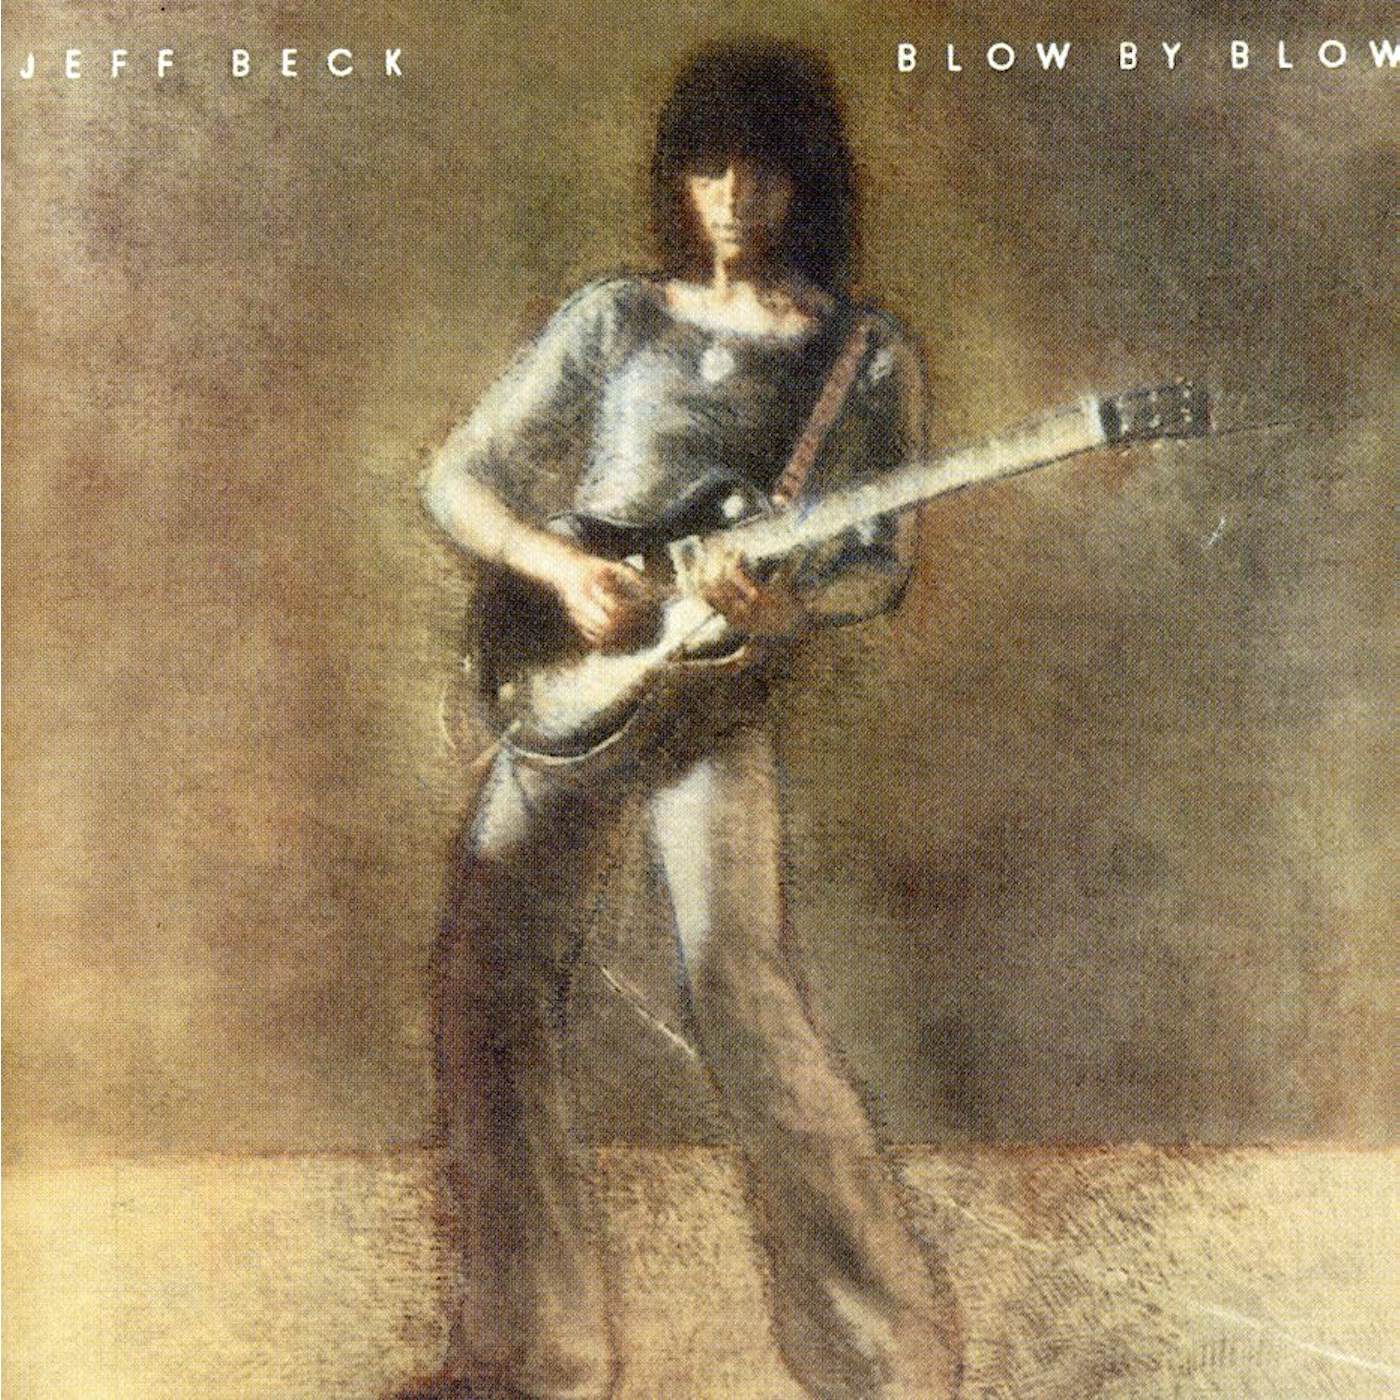 Jeff Beck BLOW BY BLOW CD